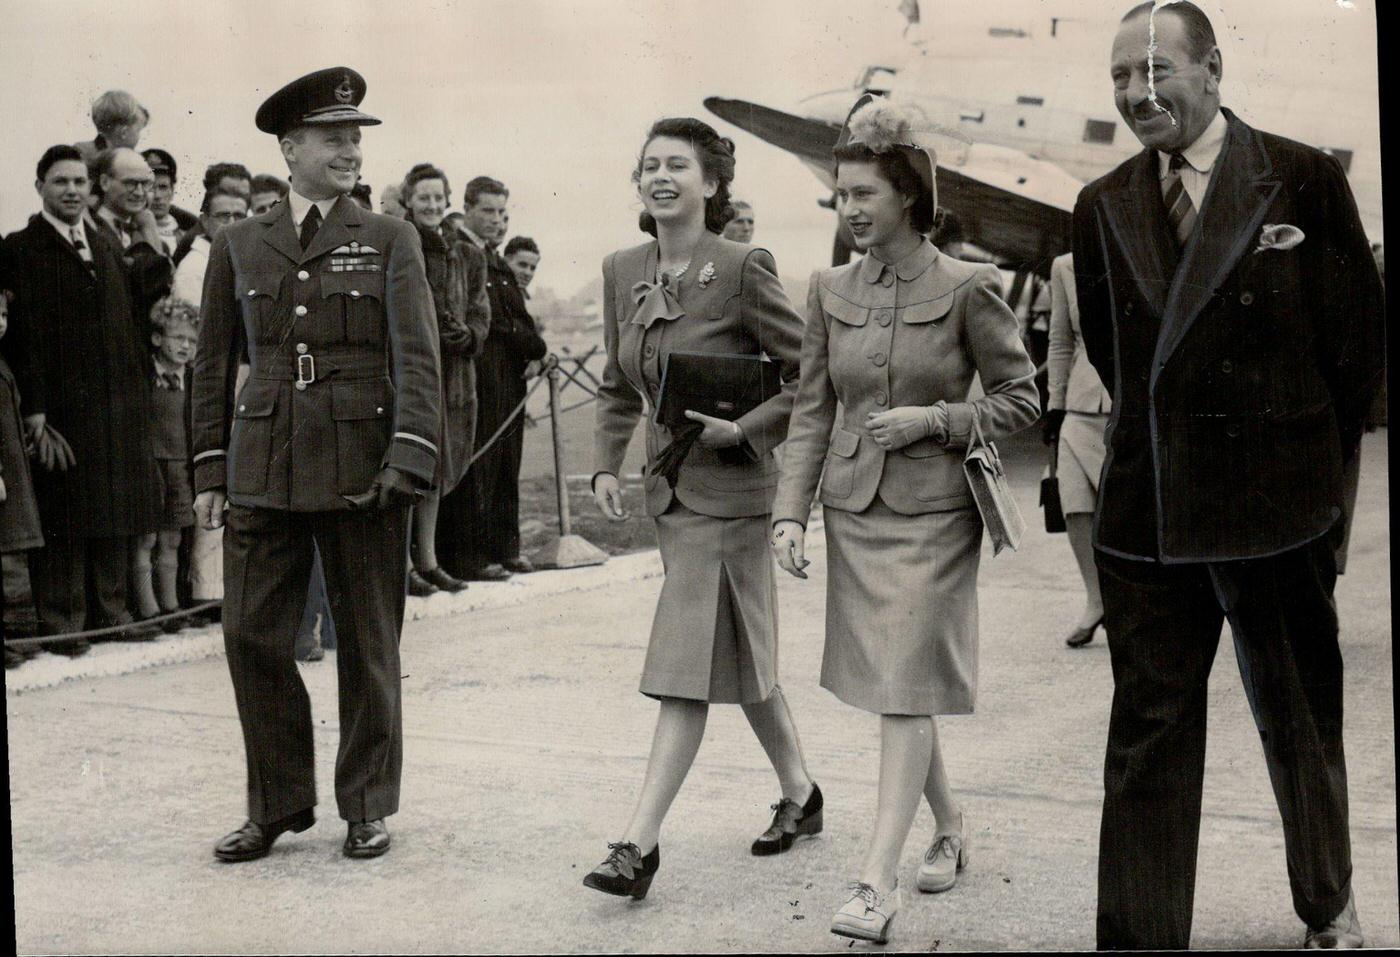 Princess Margaret is met by her betrothed sister, Princess Elizabeth, at London airport after the former had flown back from Northern Ireland launching of the new liner Edinburgh Castle, Canada, October 24, 1947.